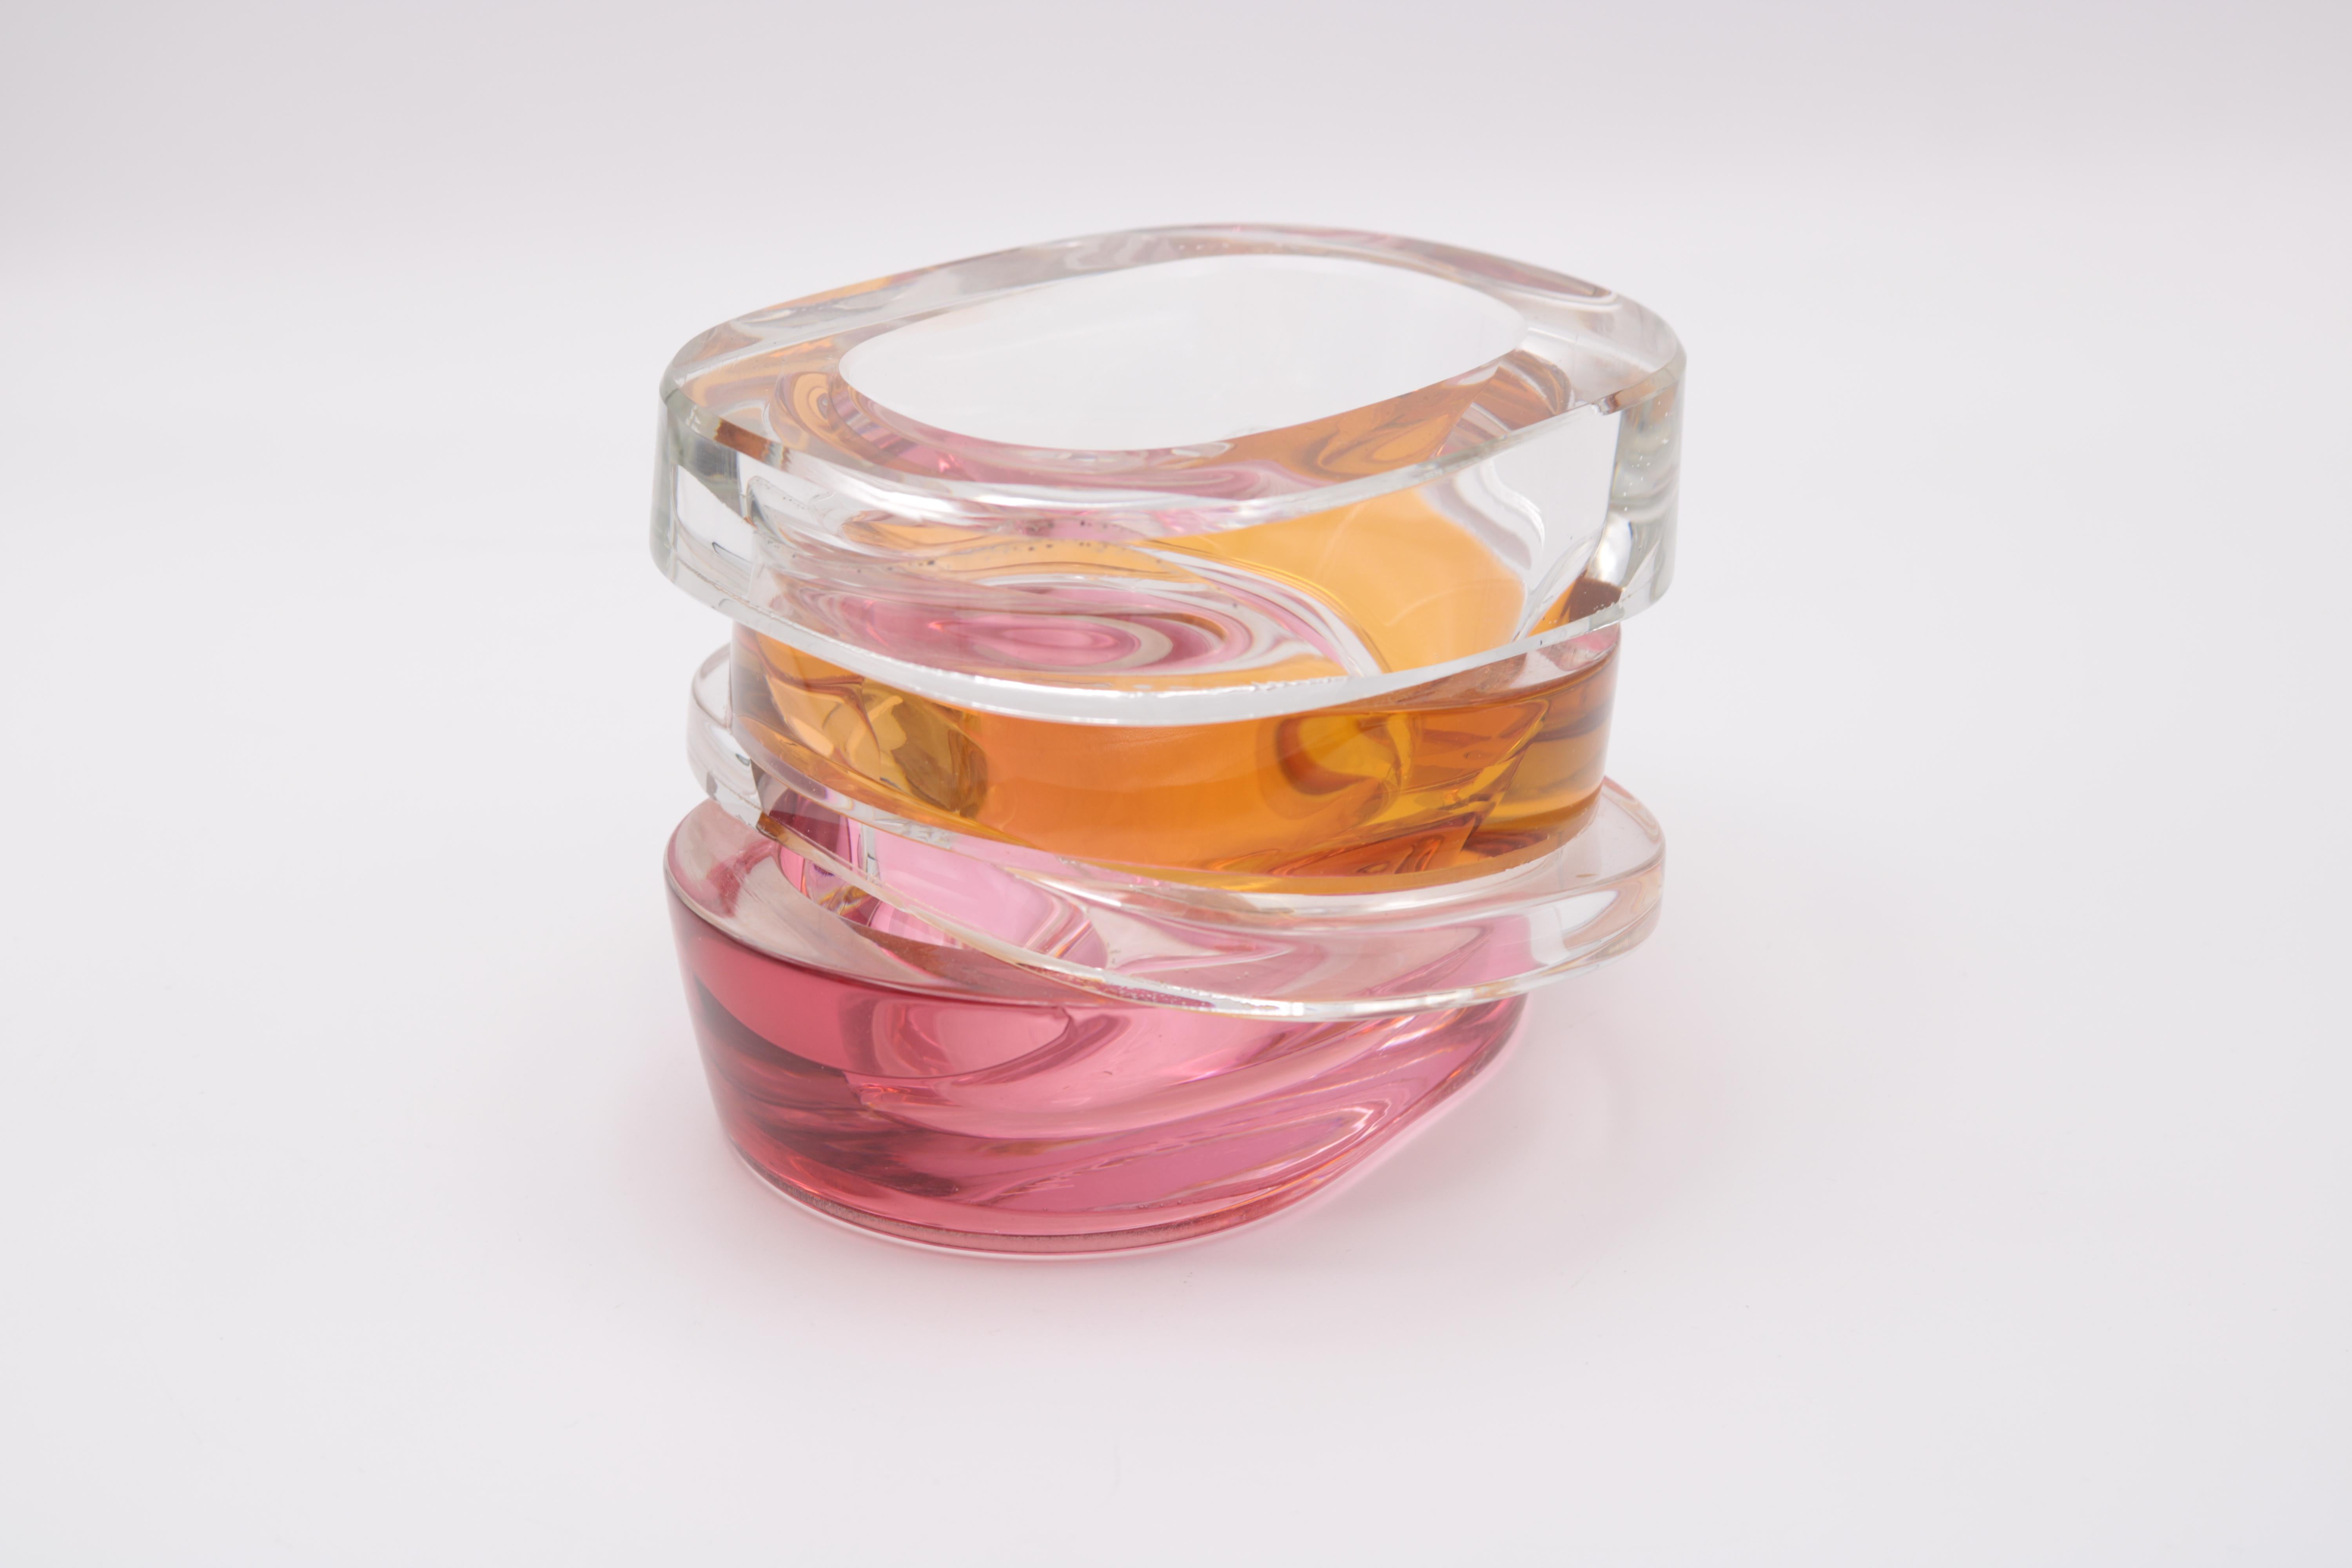 Small decorative art glass vase by German artist Martin Postch. 
Clear glass, pink glass and amber glass. Signed with etched signature underneath.